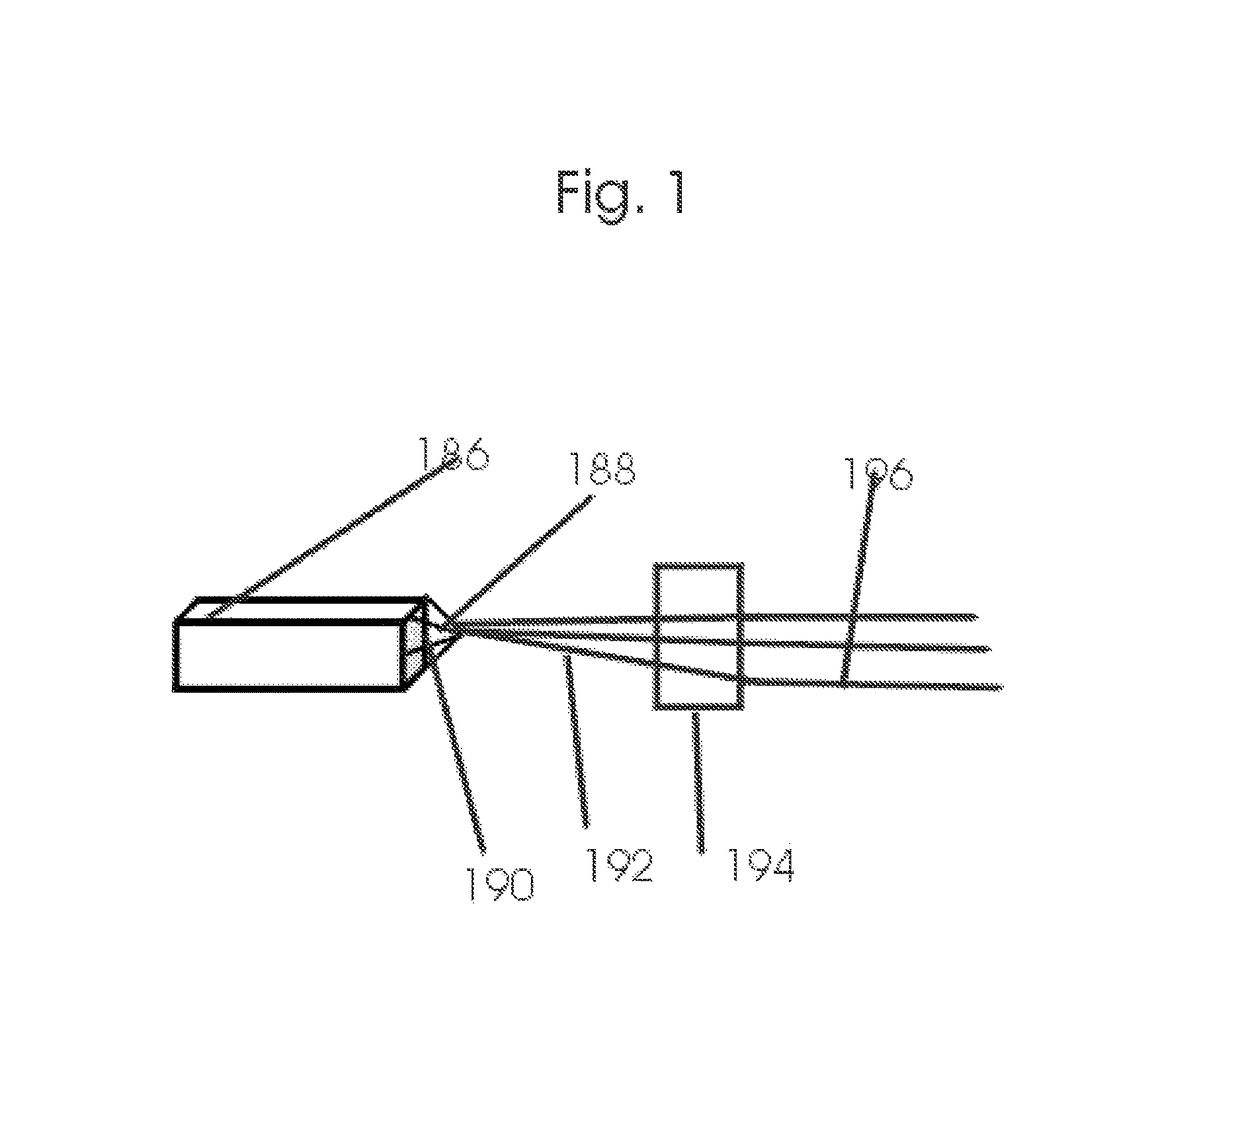 Method of image guided intraoperative simultaneous several ports microbeam radiation therapy with microfocus X-ray tubes